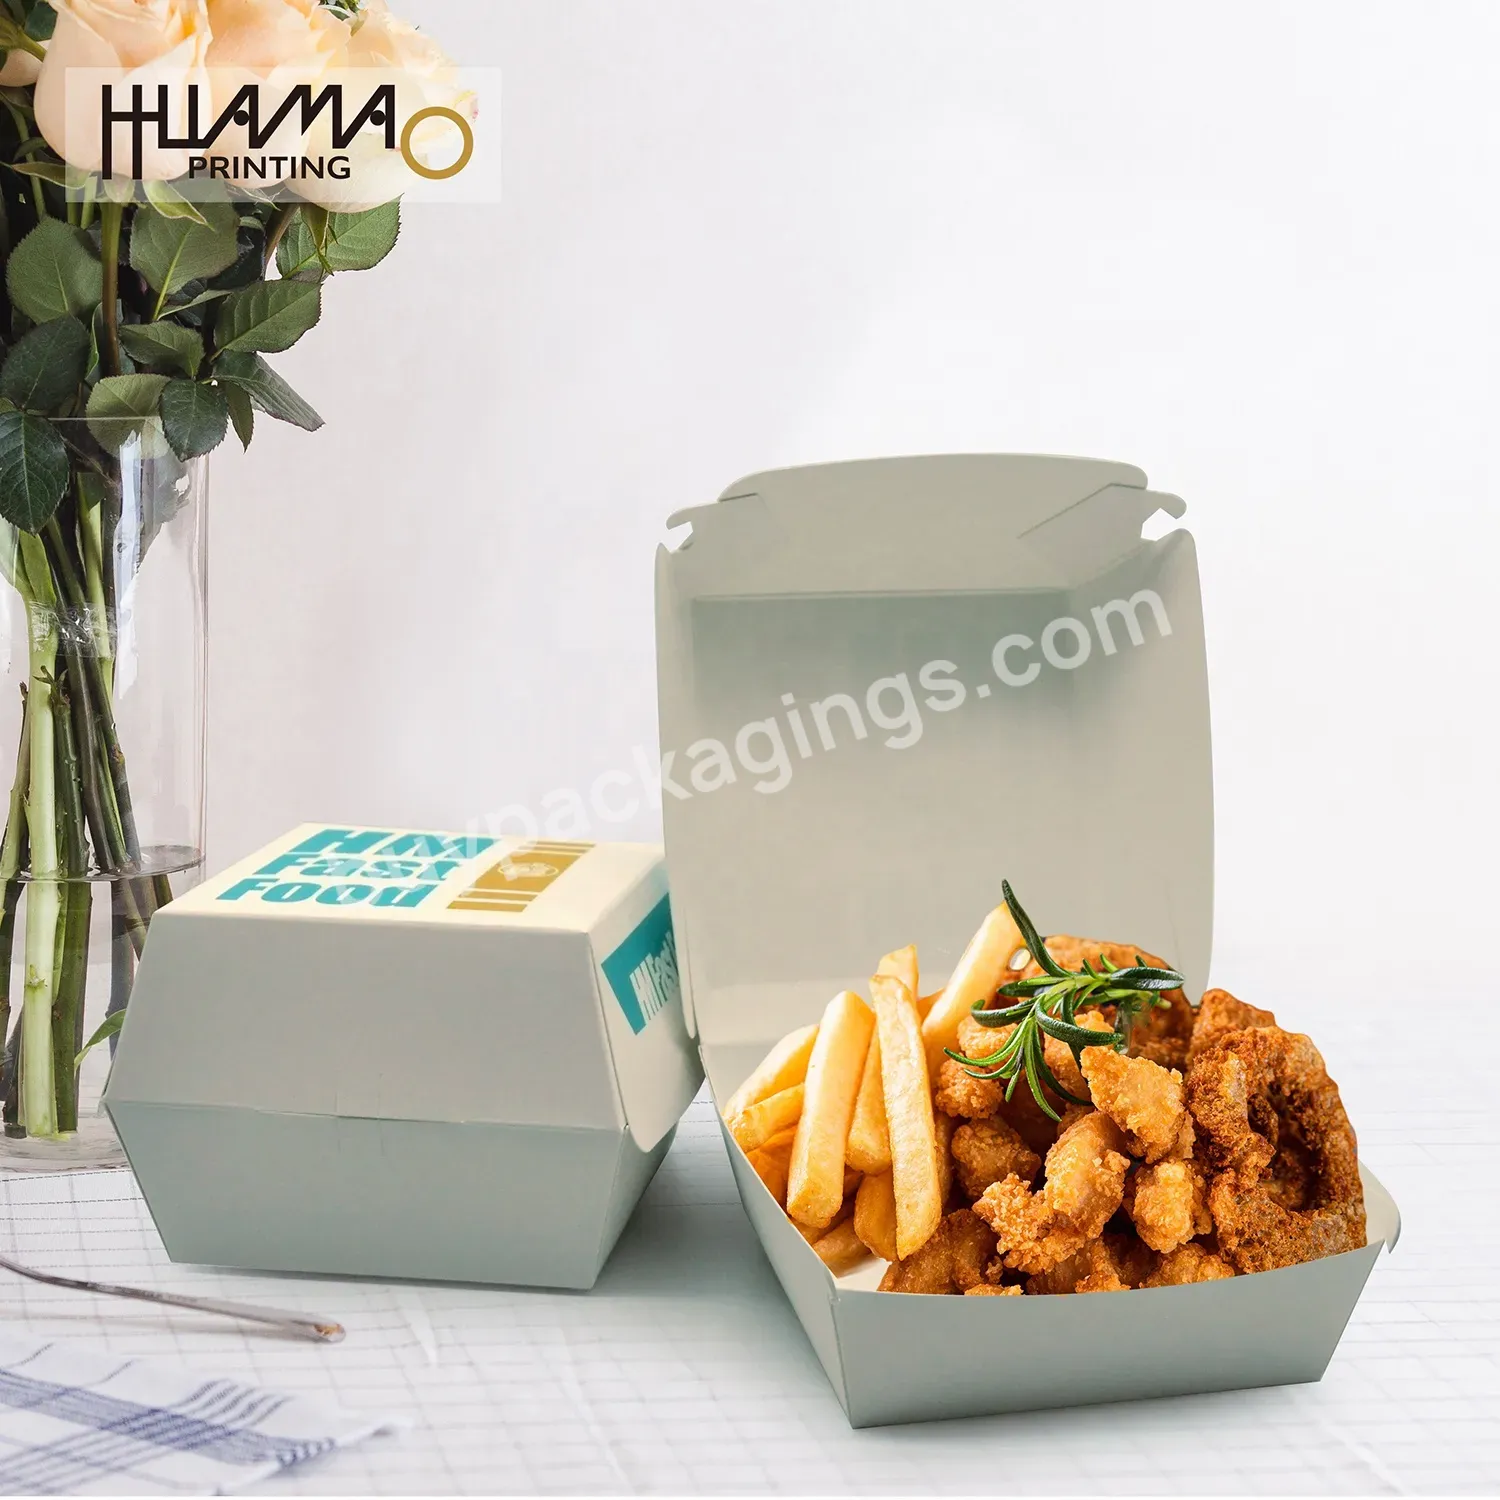 Black Luxury Candles Packaging Paper Boxes Press On Nails Packaging Huamao Package Printing Die Cut Stickers Cartoon Burger Box